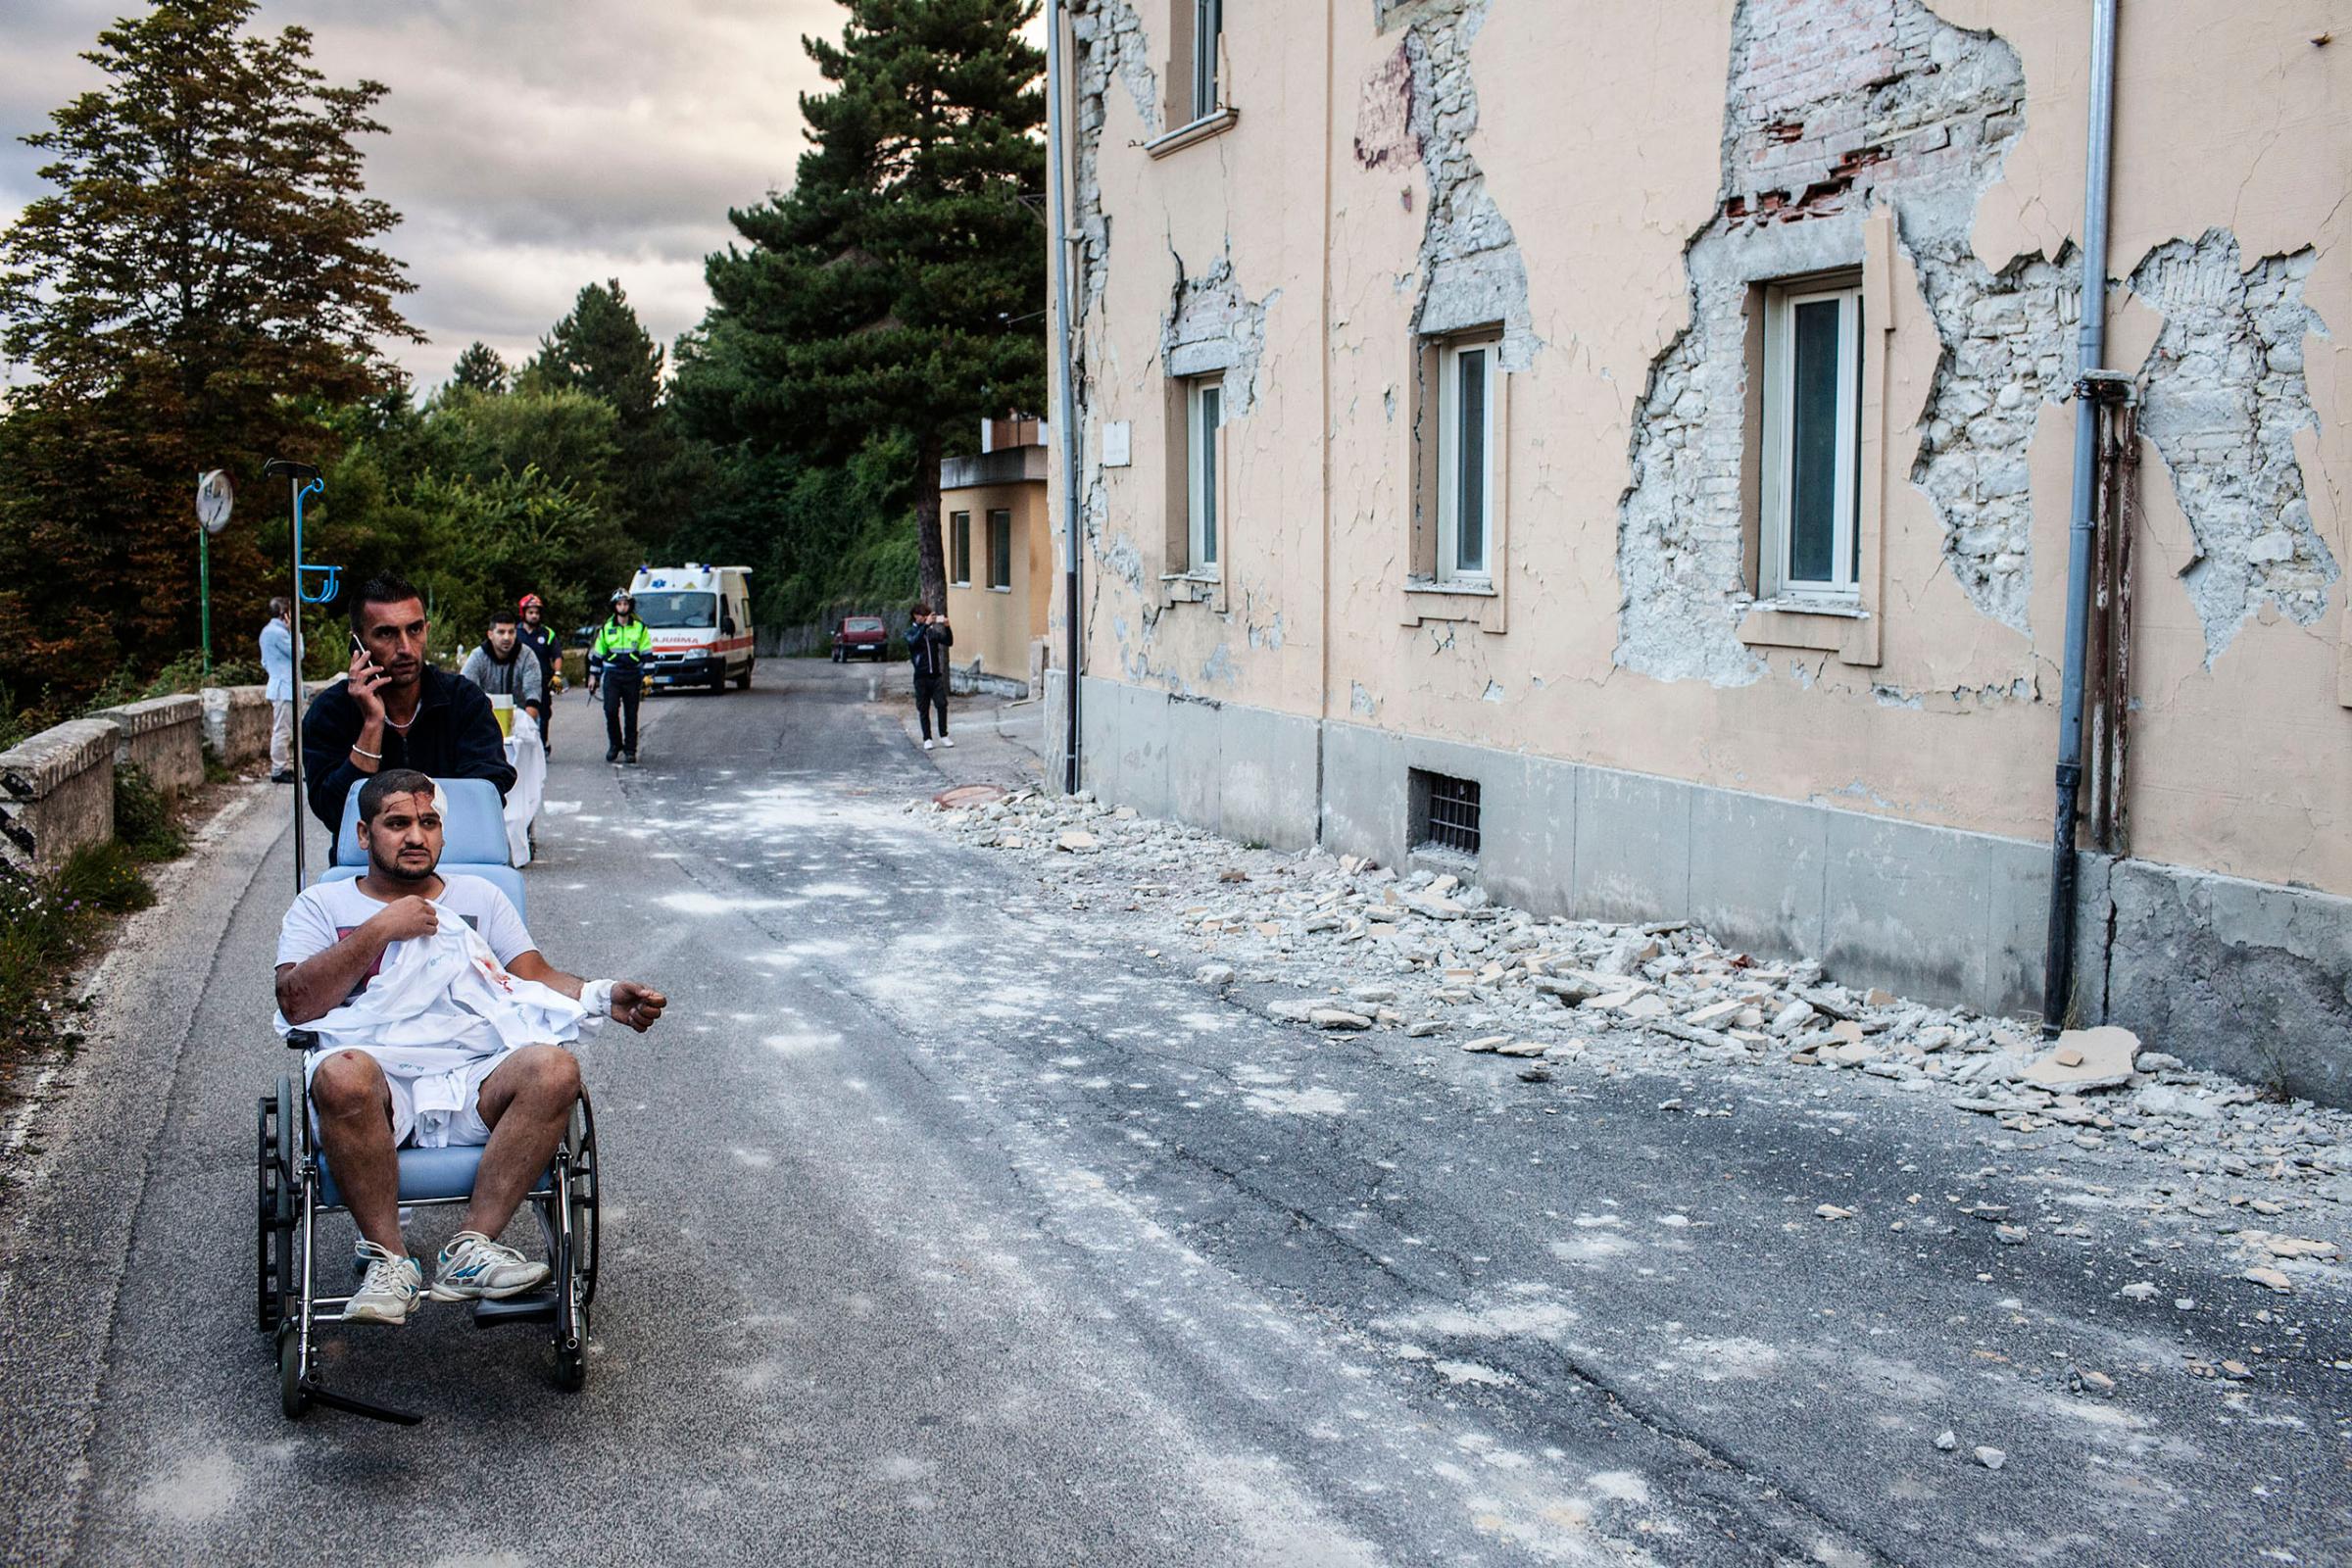 An injured man on a wheelchair outside the hospital in Amatrice, Italy, on Aug. 24, 2016.